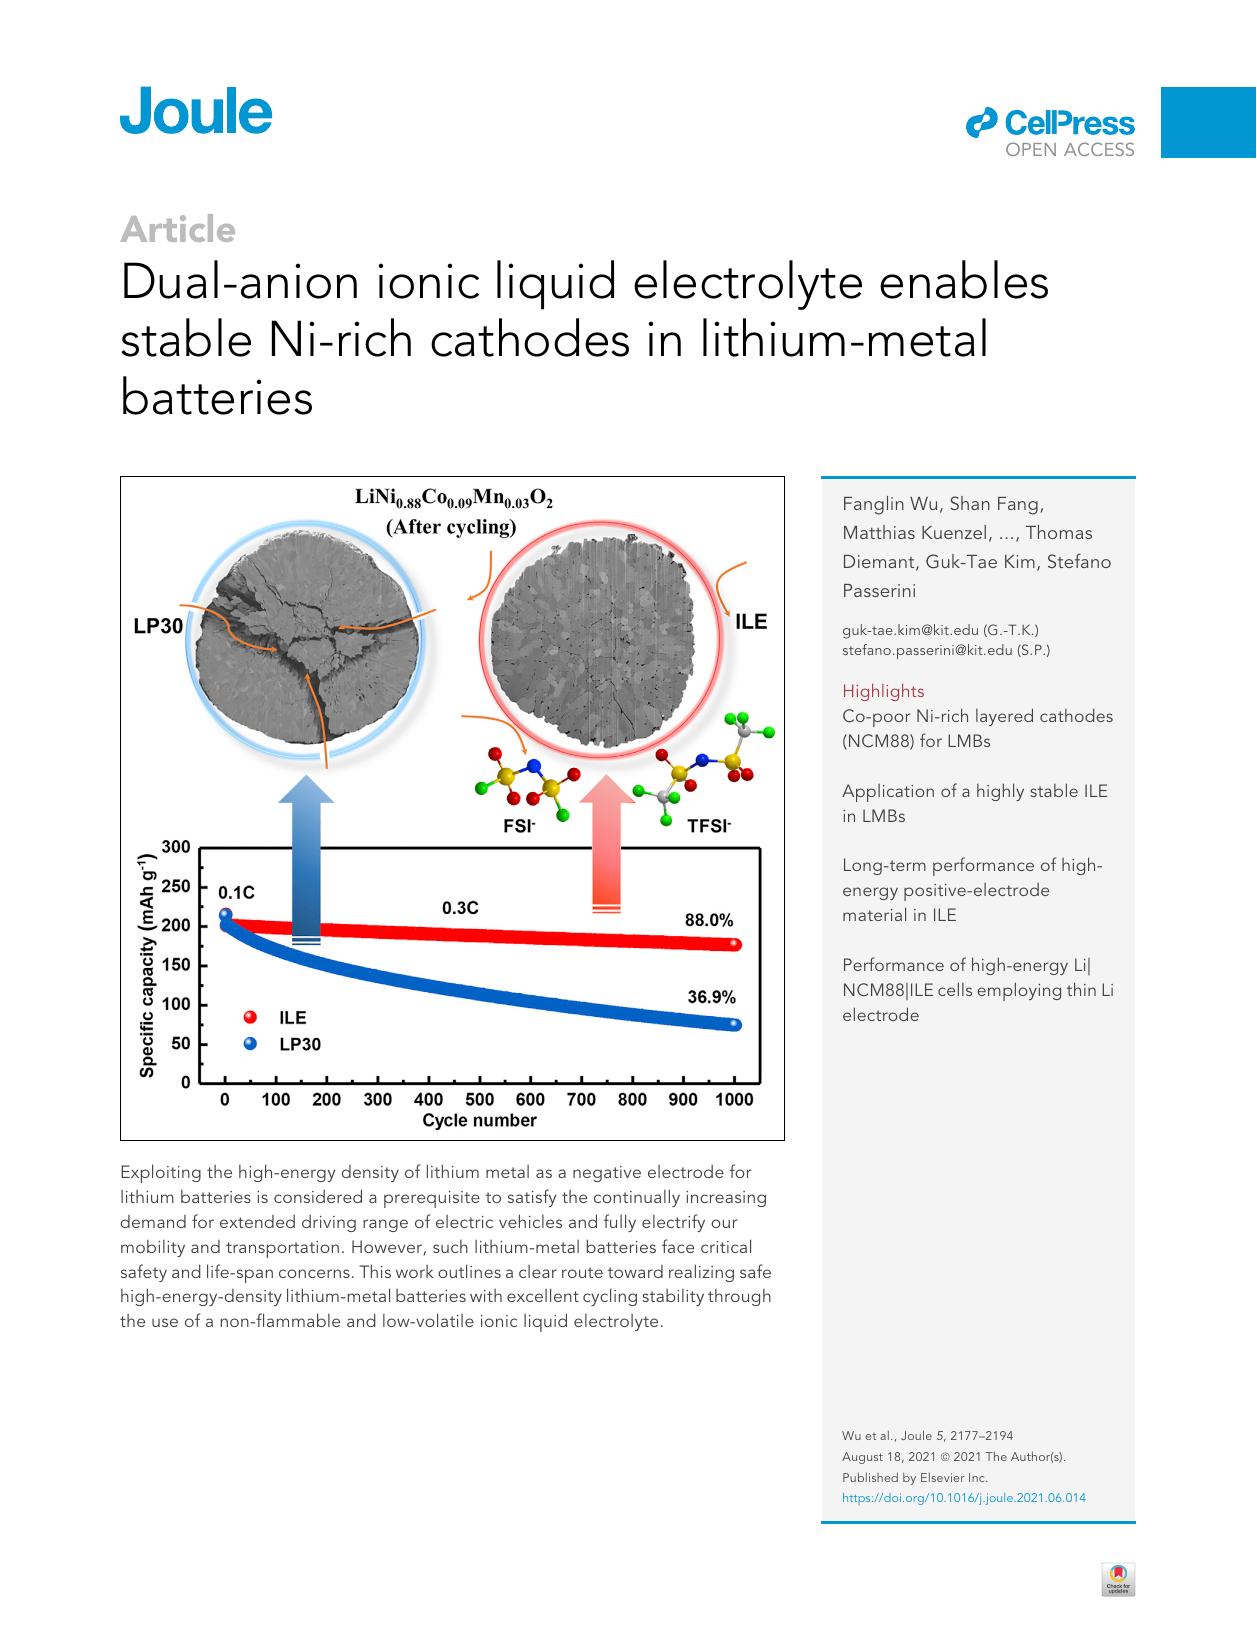 Dual-anion ionic liquid electrolyte enables stable Ni-rich cathodes in lithium-metal batteries by unknow